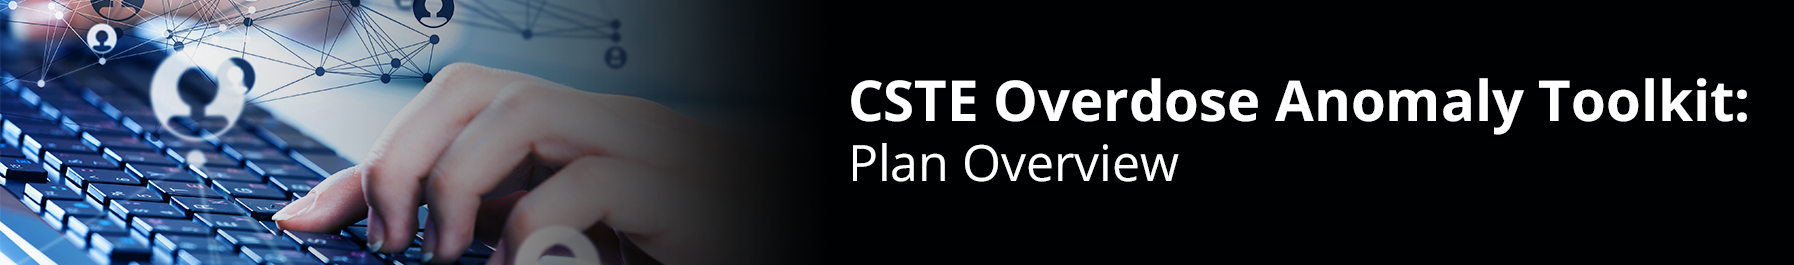 CSTE Overdose Anomaly Toolkit: Plan Overview